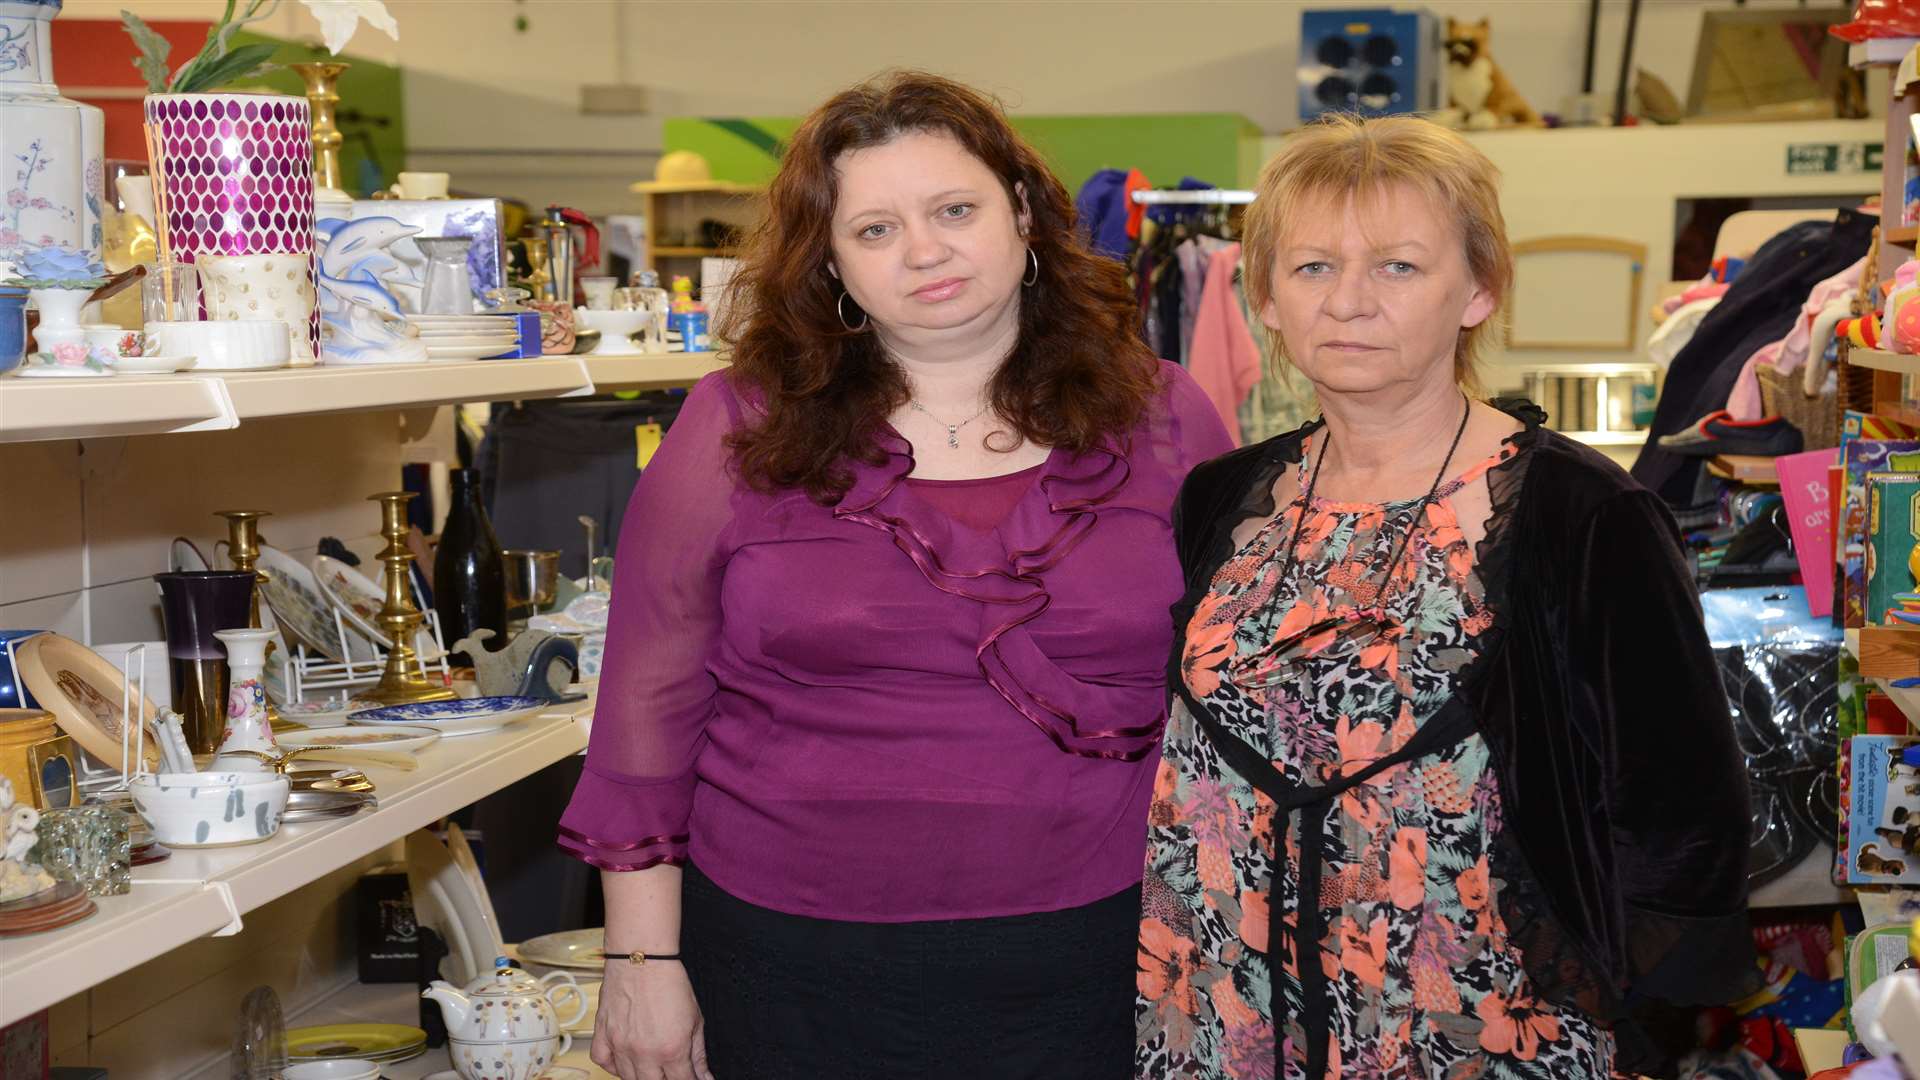 Karen Payne and Kim West in the shop on Strood High Street